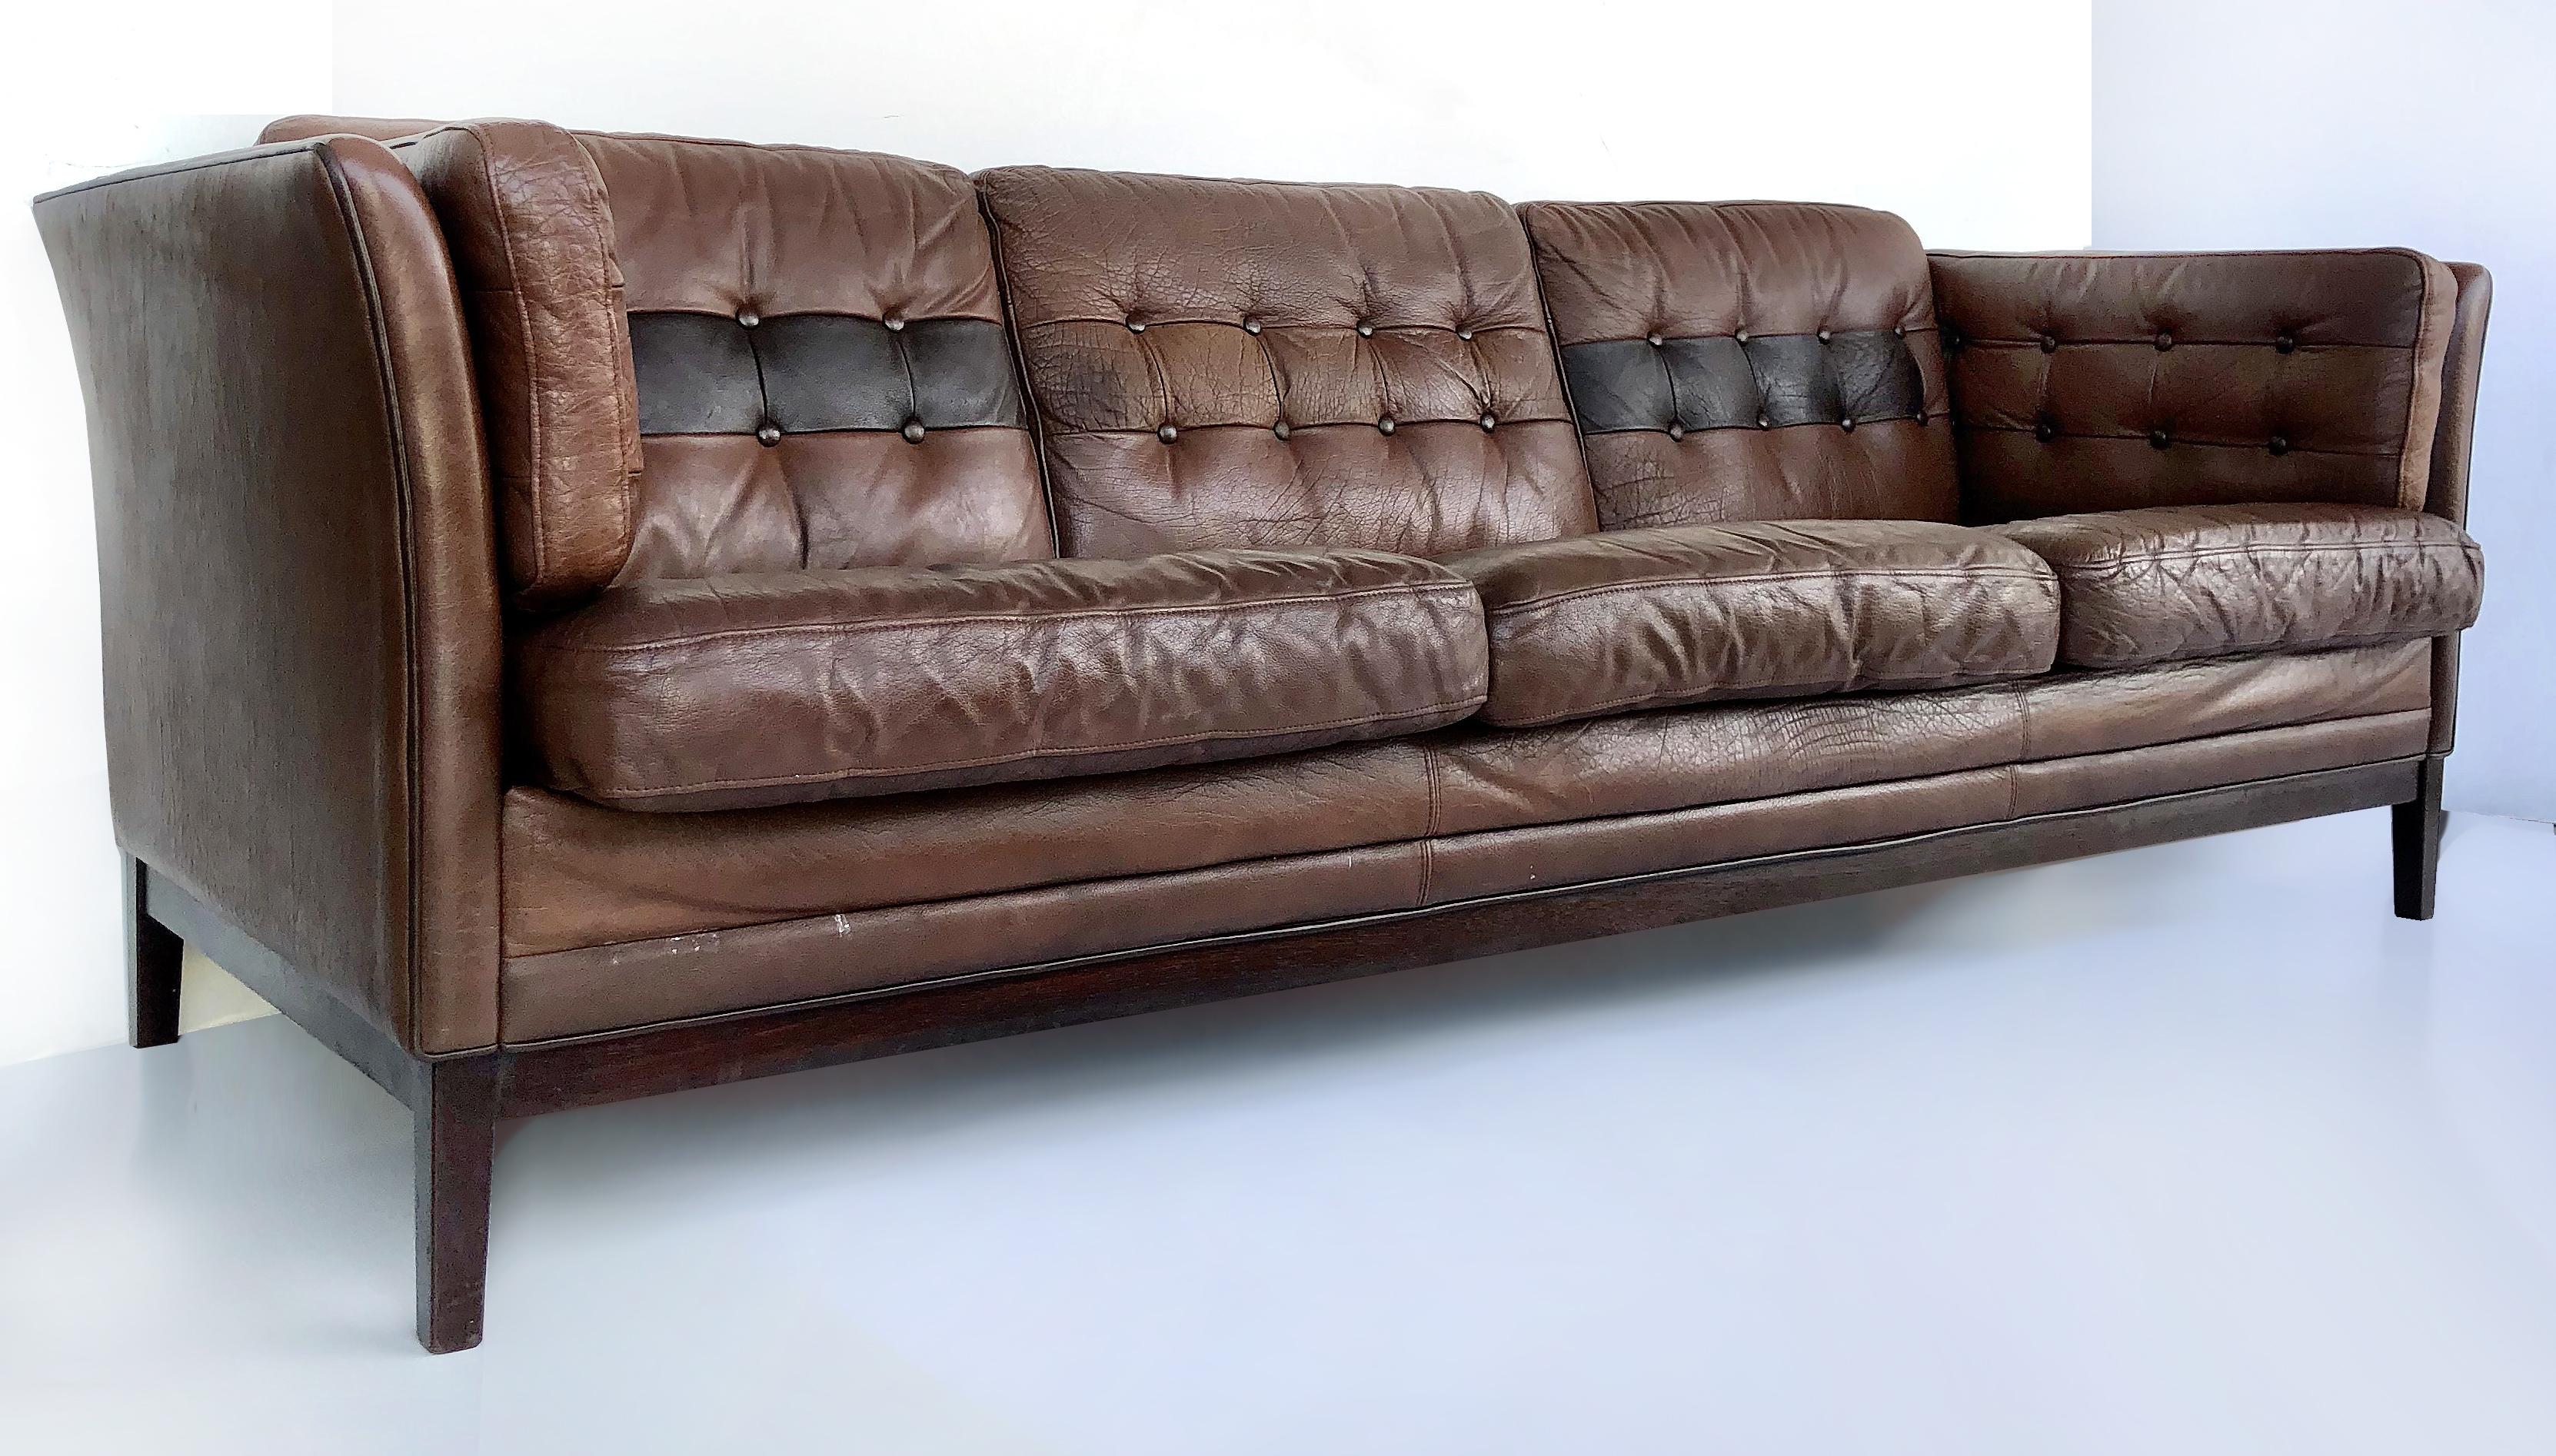 Scandinavian modern leather and rosewood sofa, 1970s

Offered for sale is an elegant and timeless 1970s Danish modern tufted leather and Brazilian rosewood sofa created in the manner of Borge Mogensen. The settee has 8 loose cushions that have a